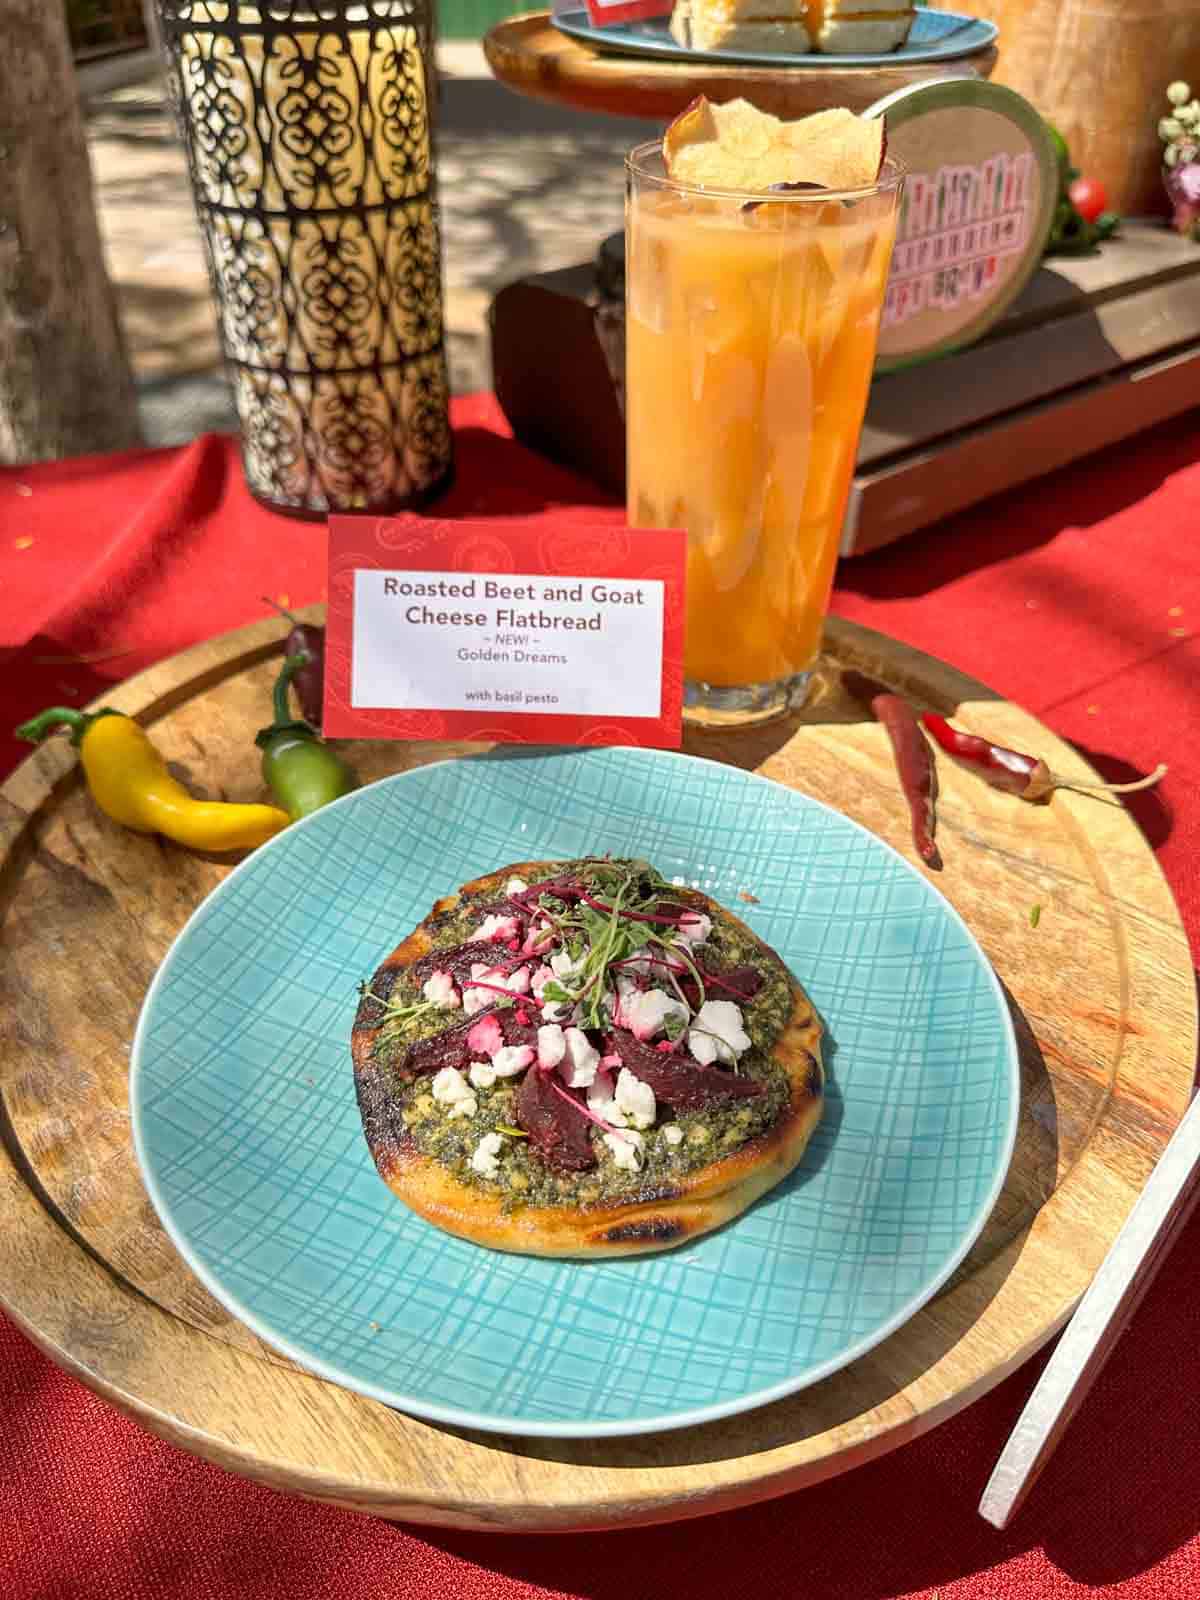 A round flatbread topped with goat cheese and beets sitting on a turquoise plate on a wooden round board.